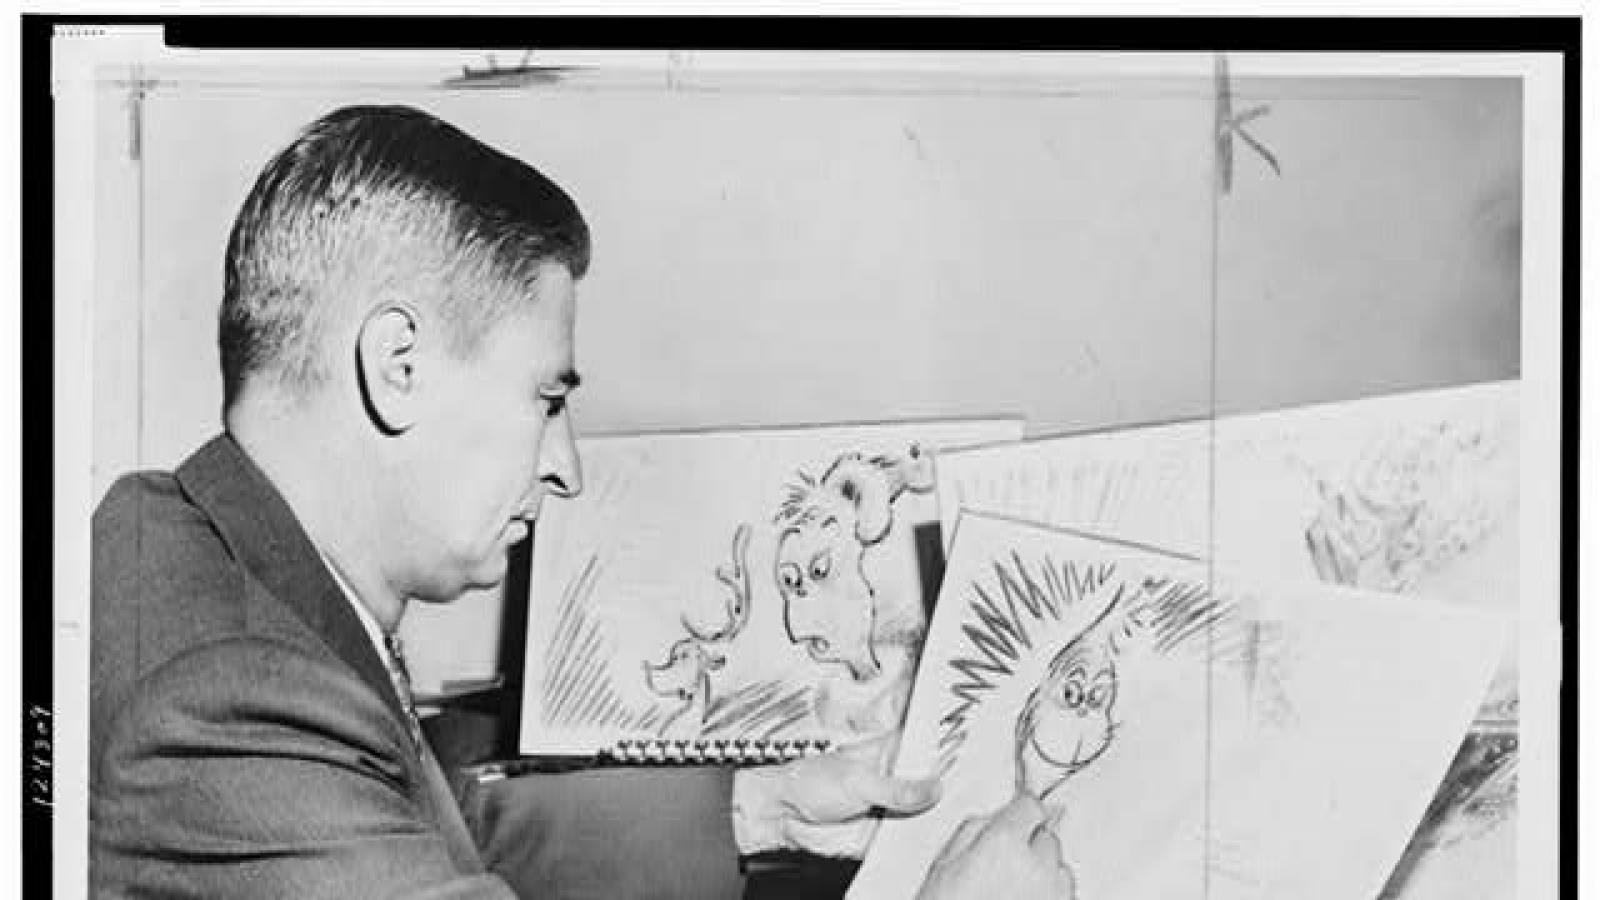 Dr. Seuss drawing an image of the grinch